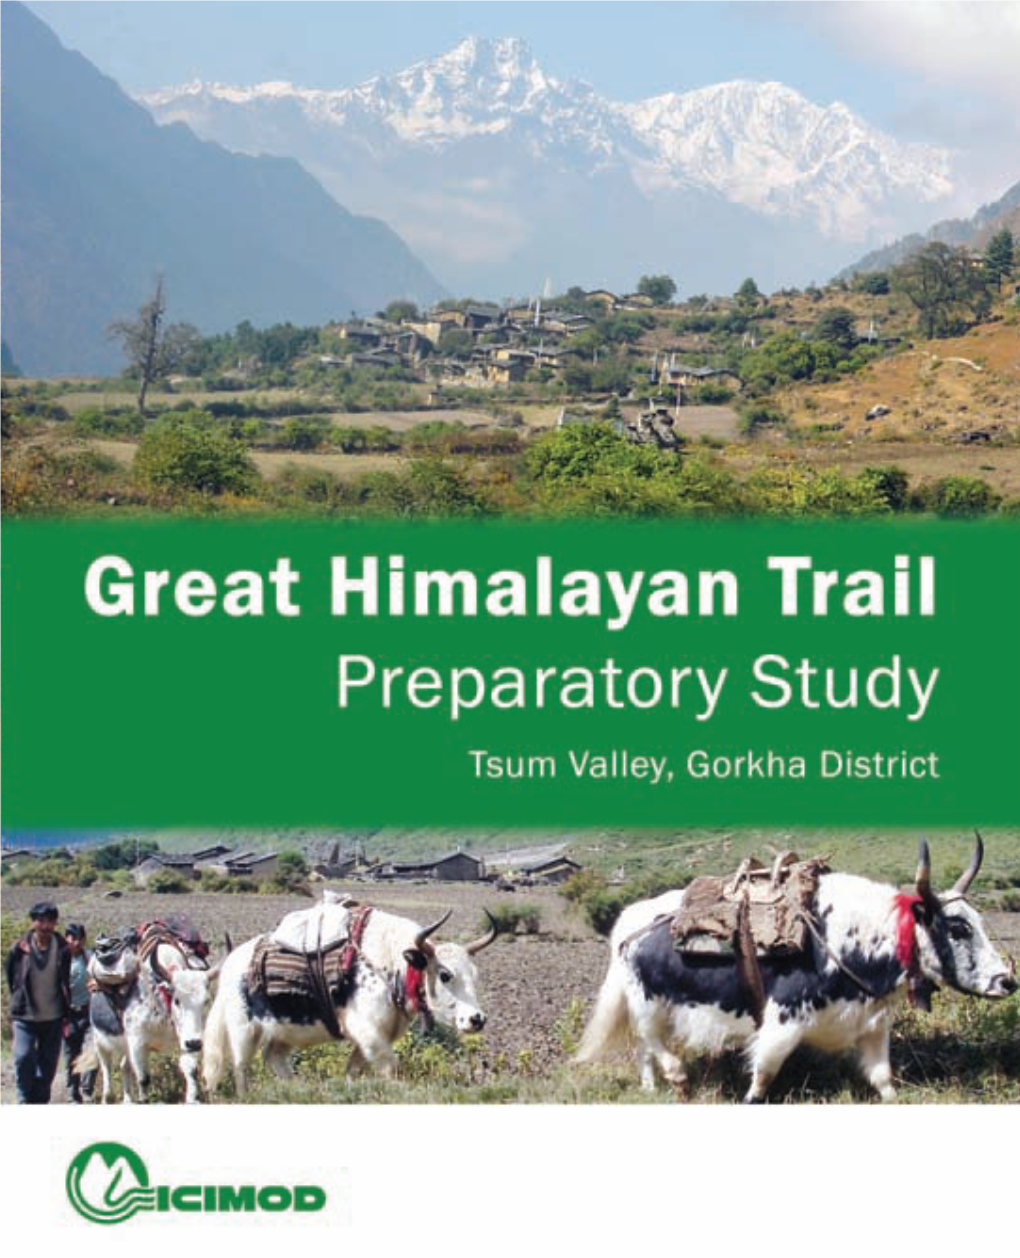 Tsum Valley, Gorkha District Internal Report for Limited Distribution